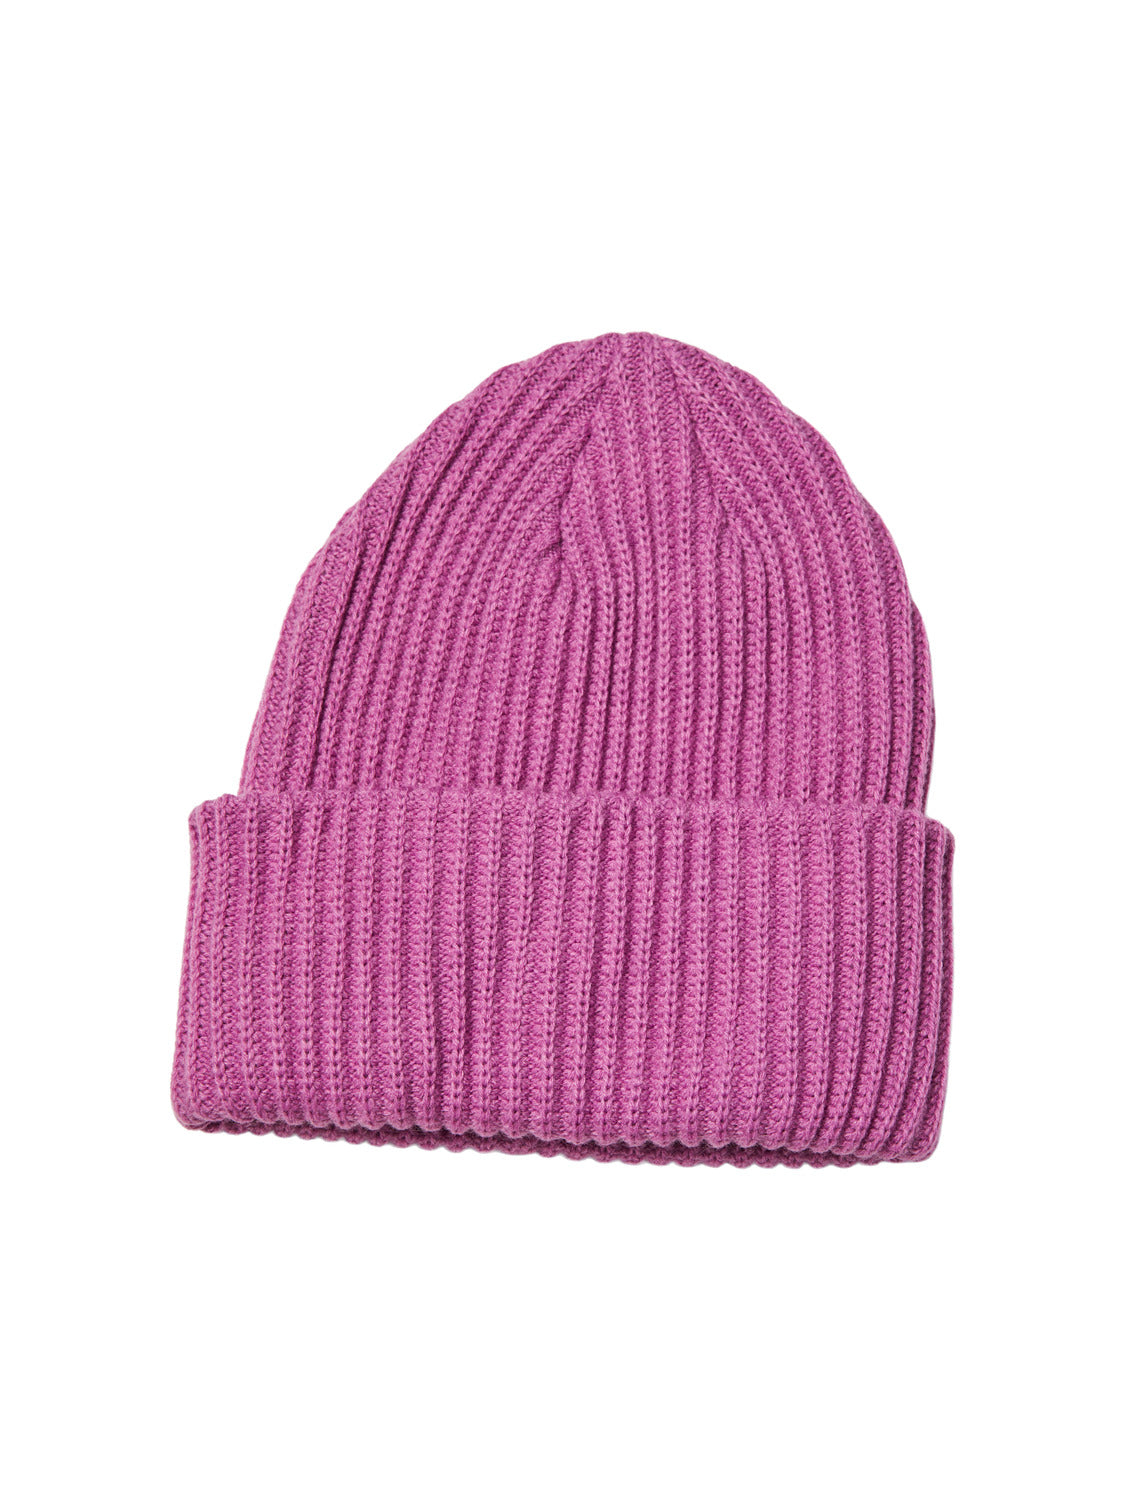 PCHEXO Headwear - Radiant Orchid